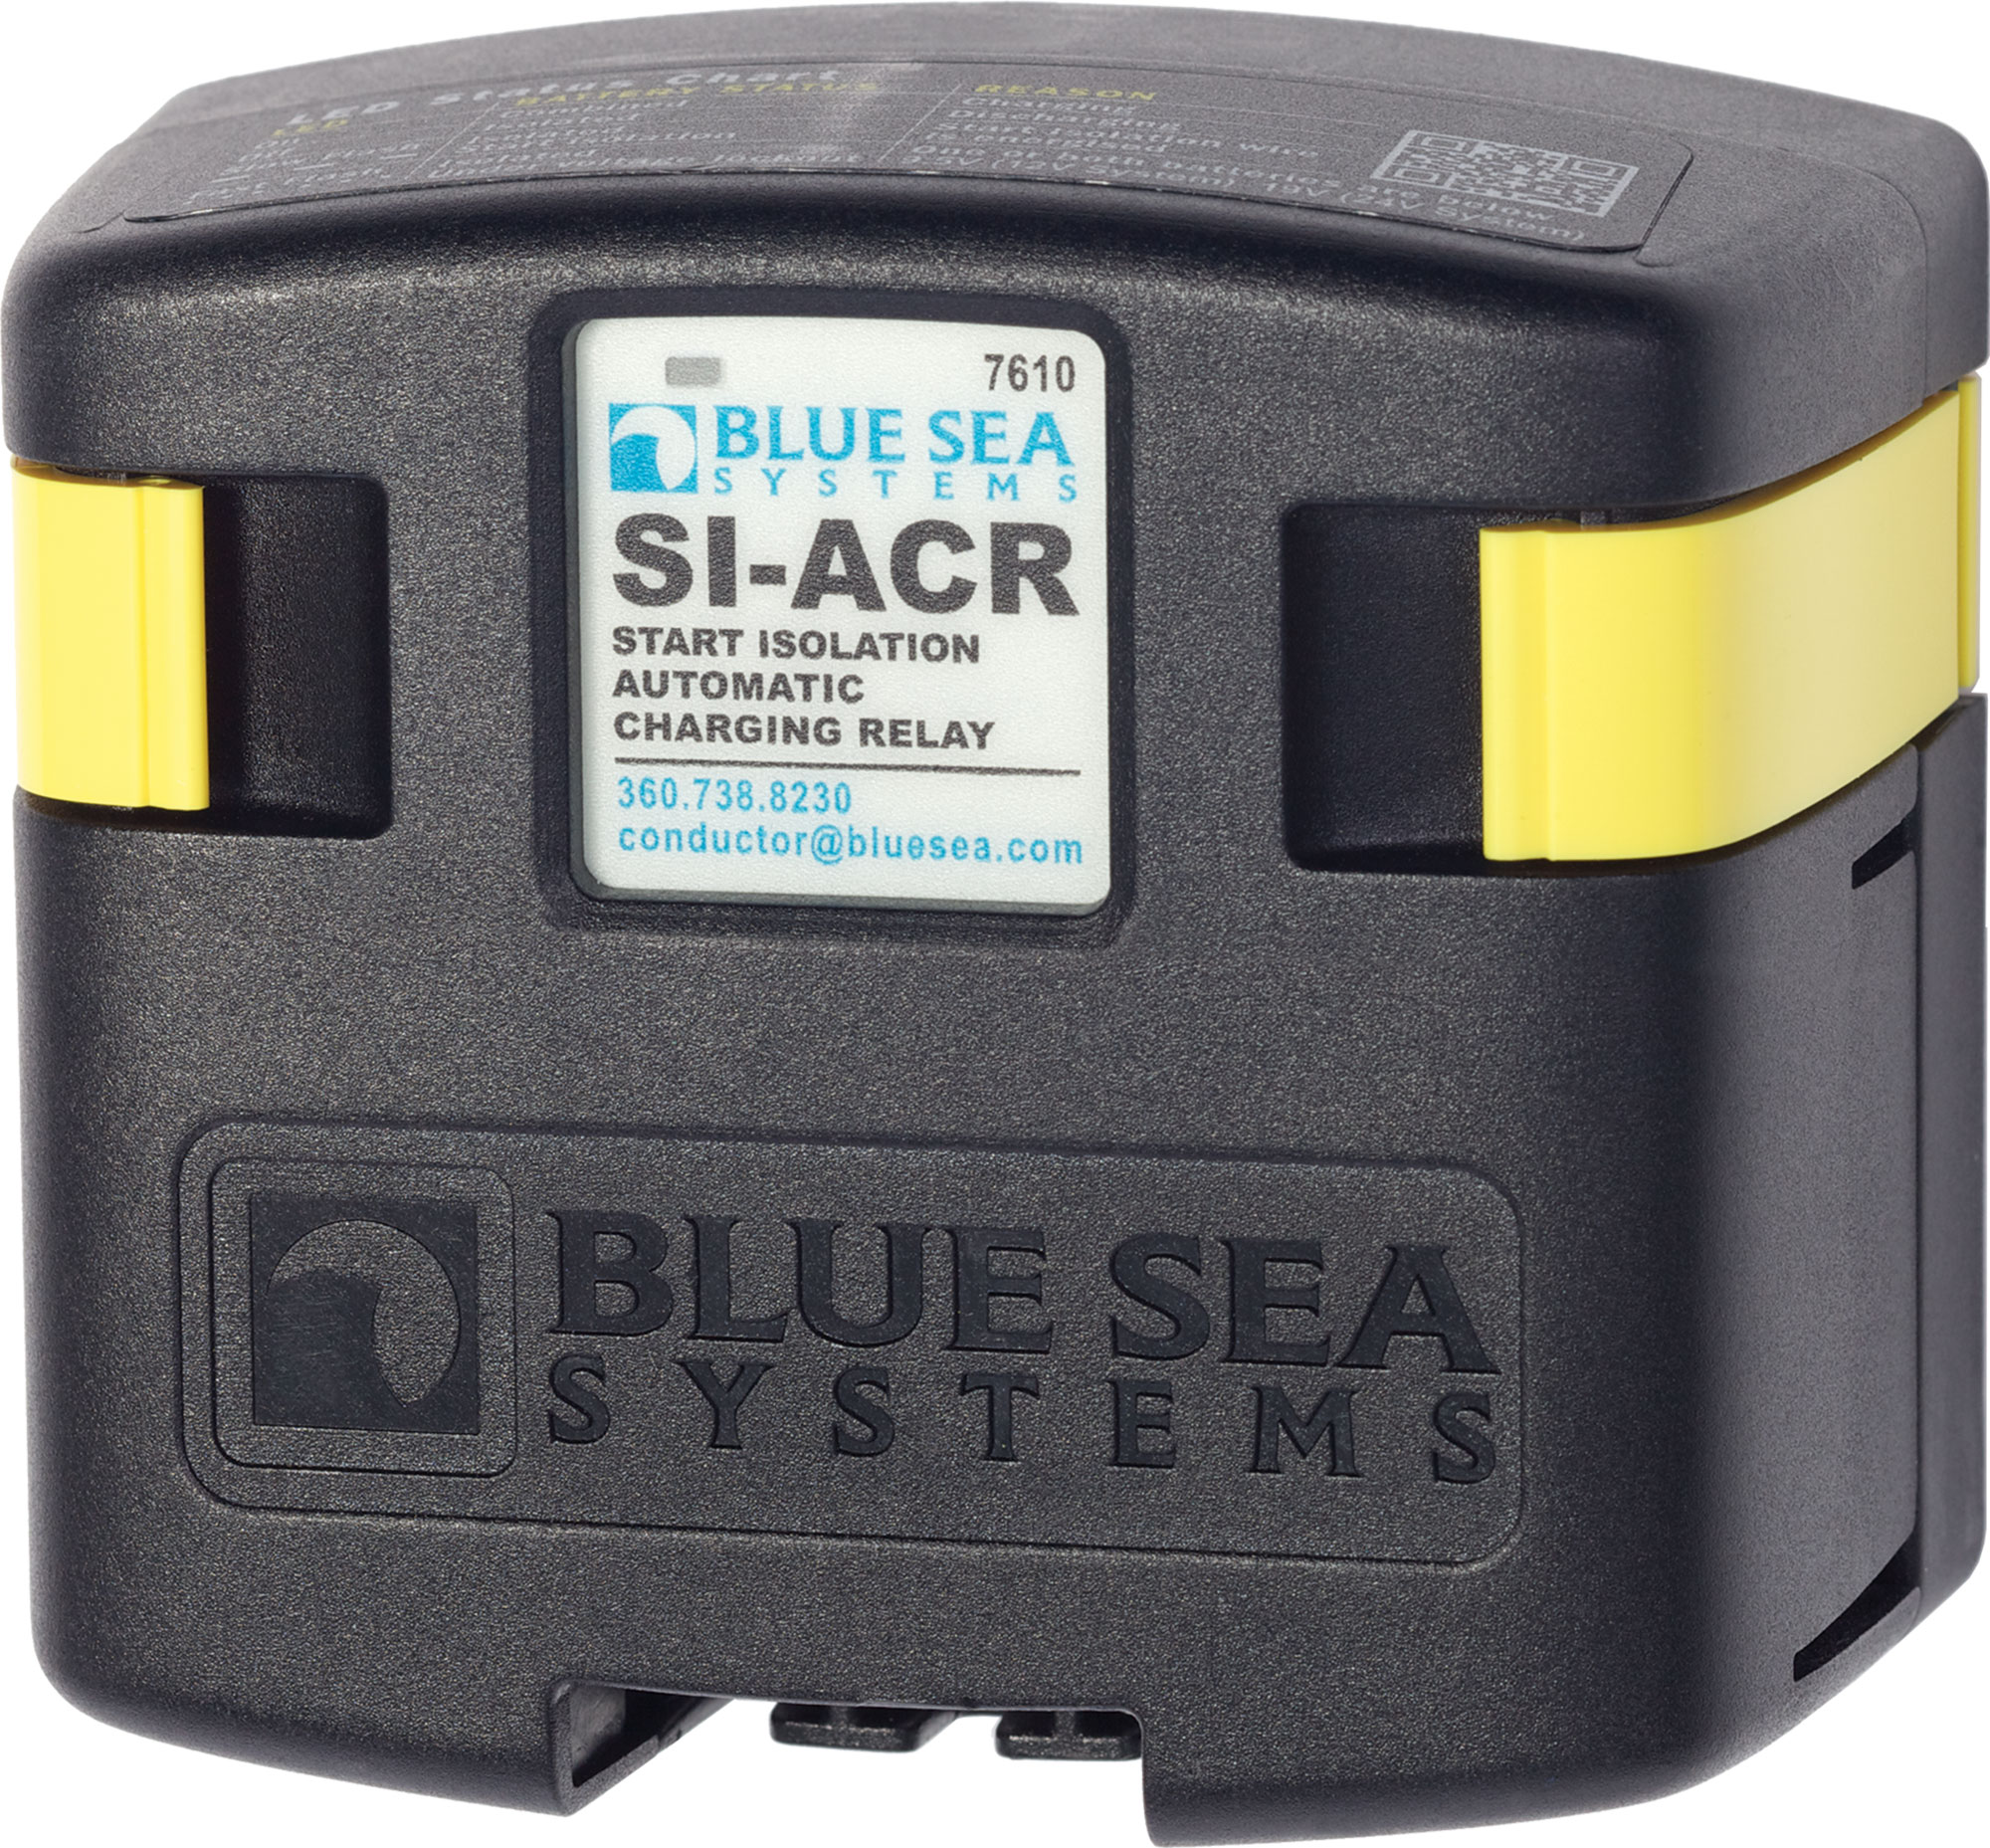 Part# 7610B  Manufacturer Blue Sea Systems  Part Type Battery Solenoid